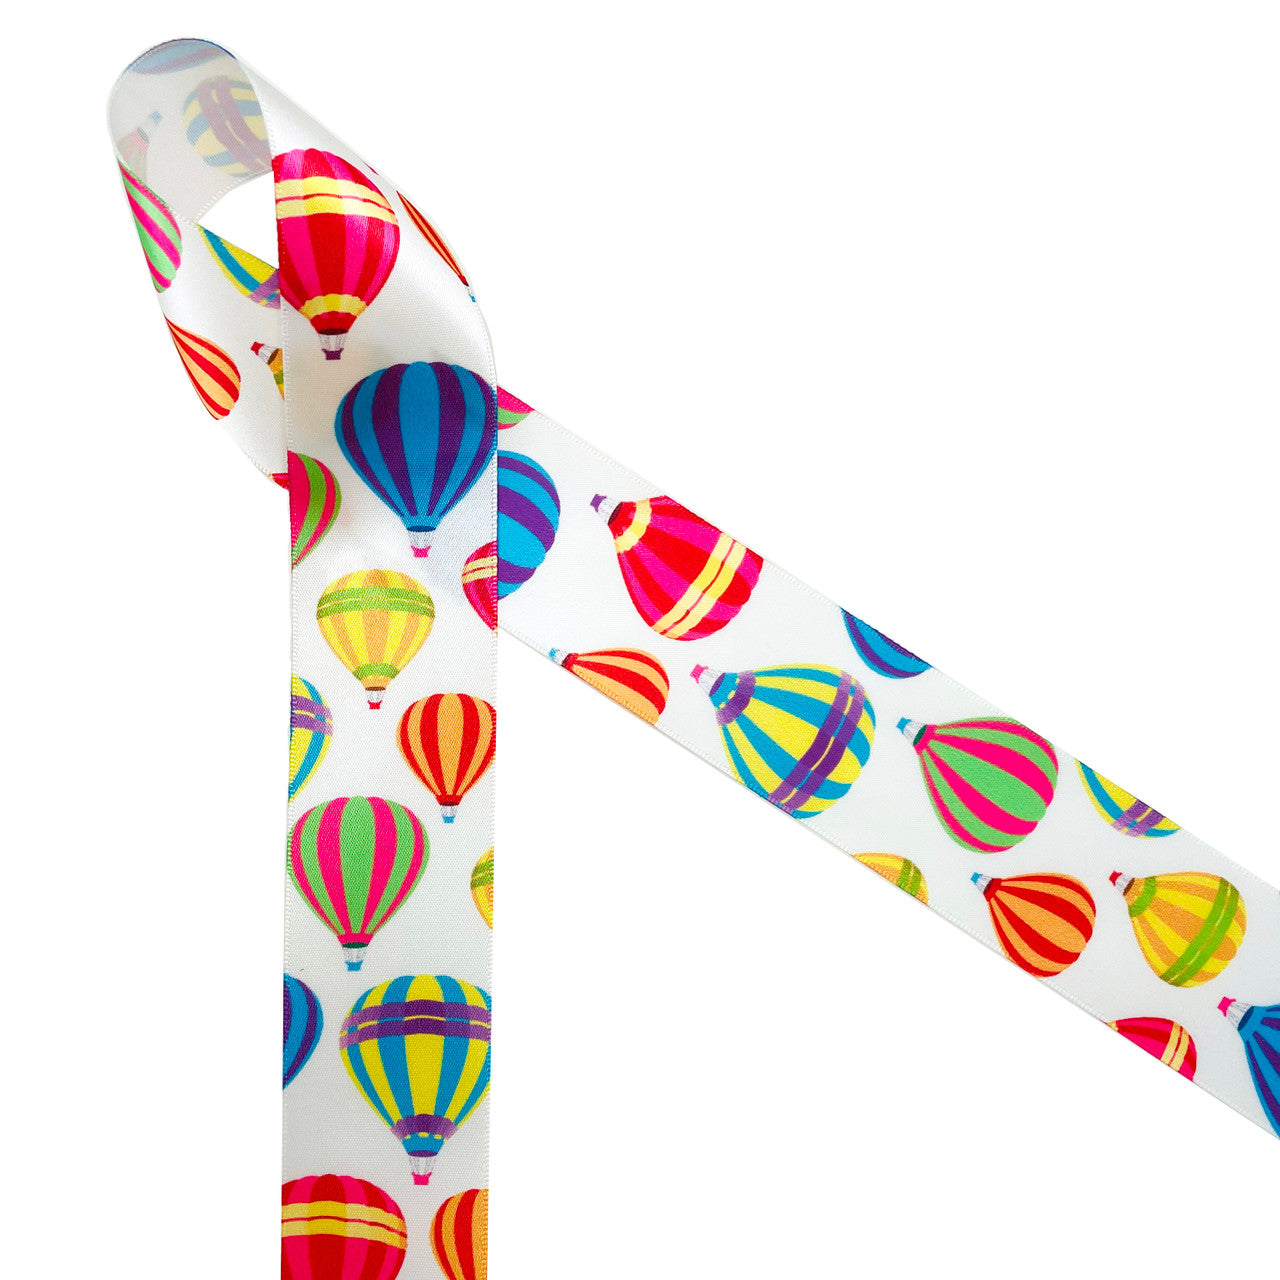 Colorful hot air balloons drift away on 1.5" white single face satin ribbon! This is an ideal ribbon for birthday parties, party decor, hair bows, head bands and quilting projects. Be sure to have this fun ribbon on hand for all your crafting needs! Our ribbon is designed and printed in the USA